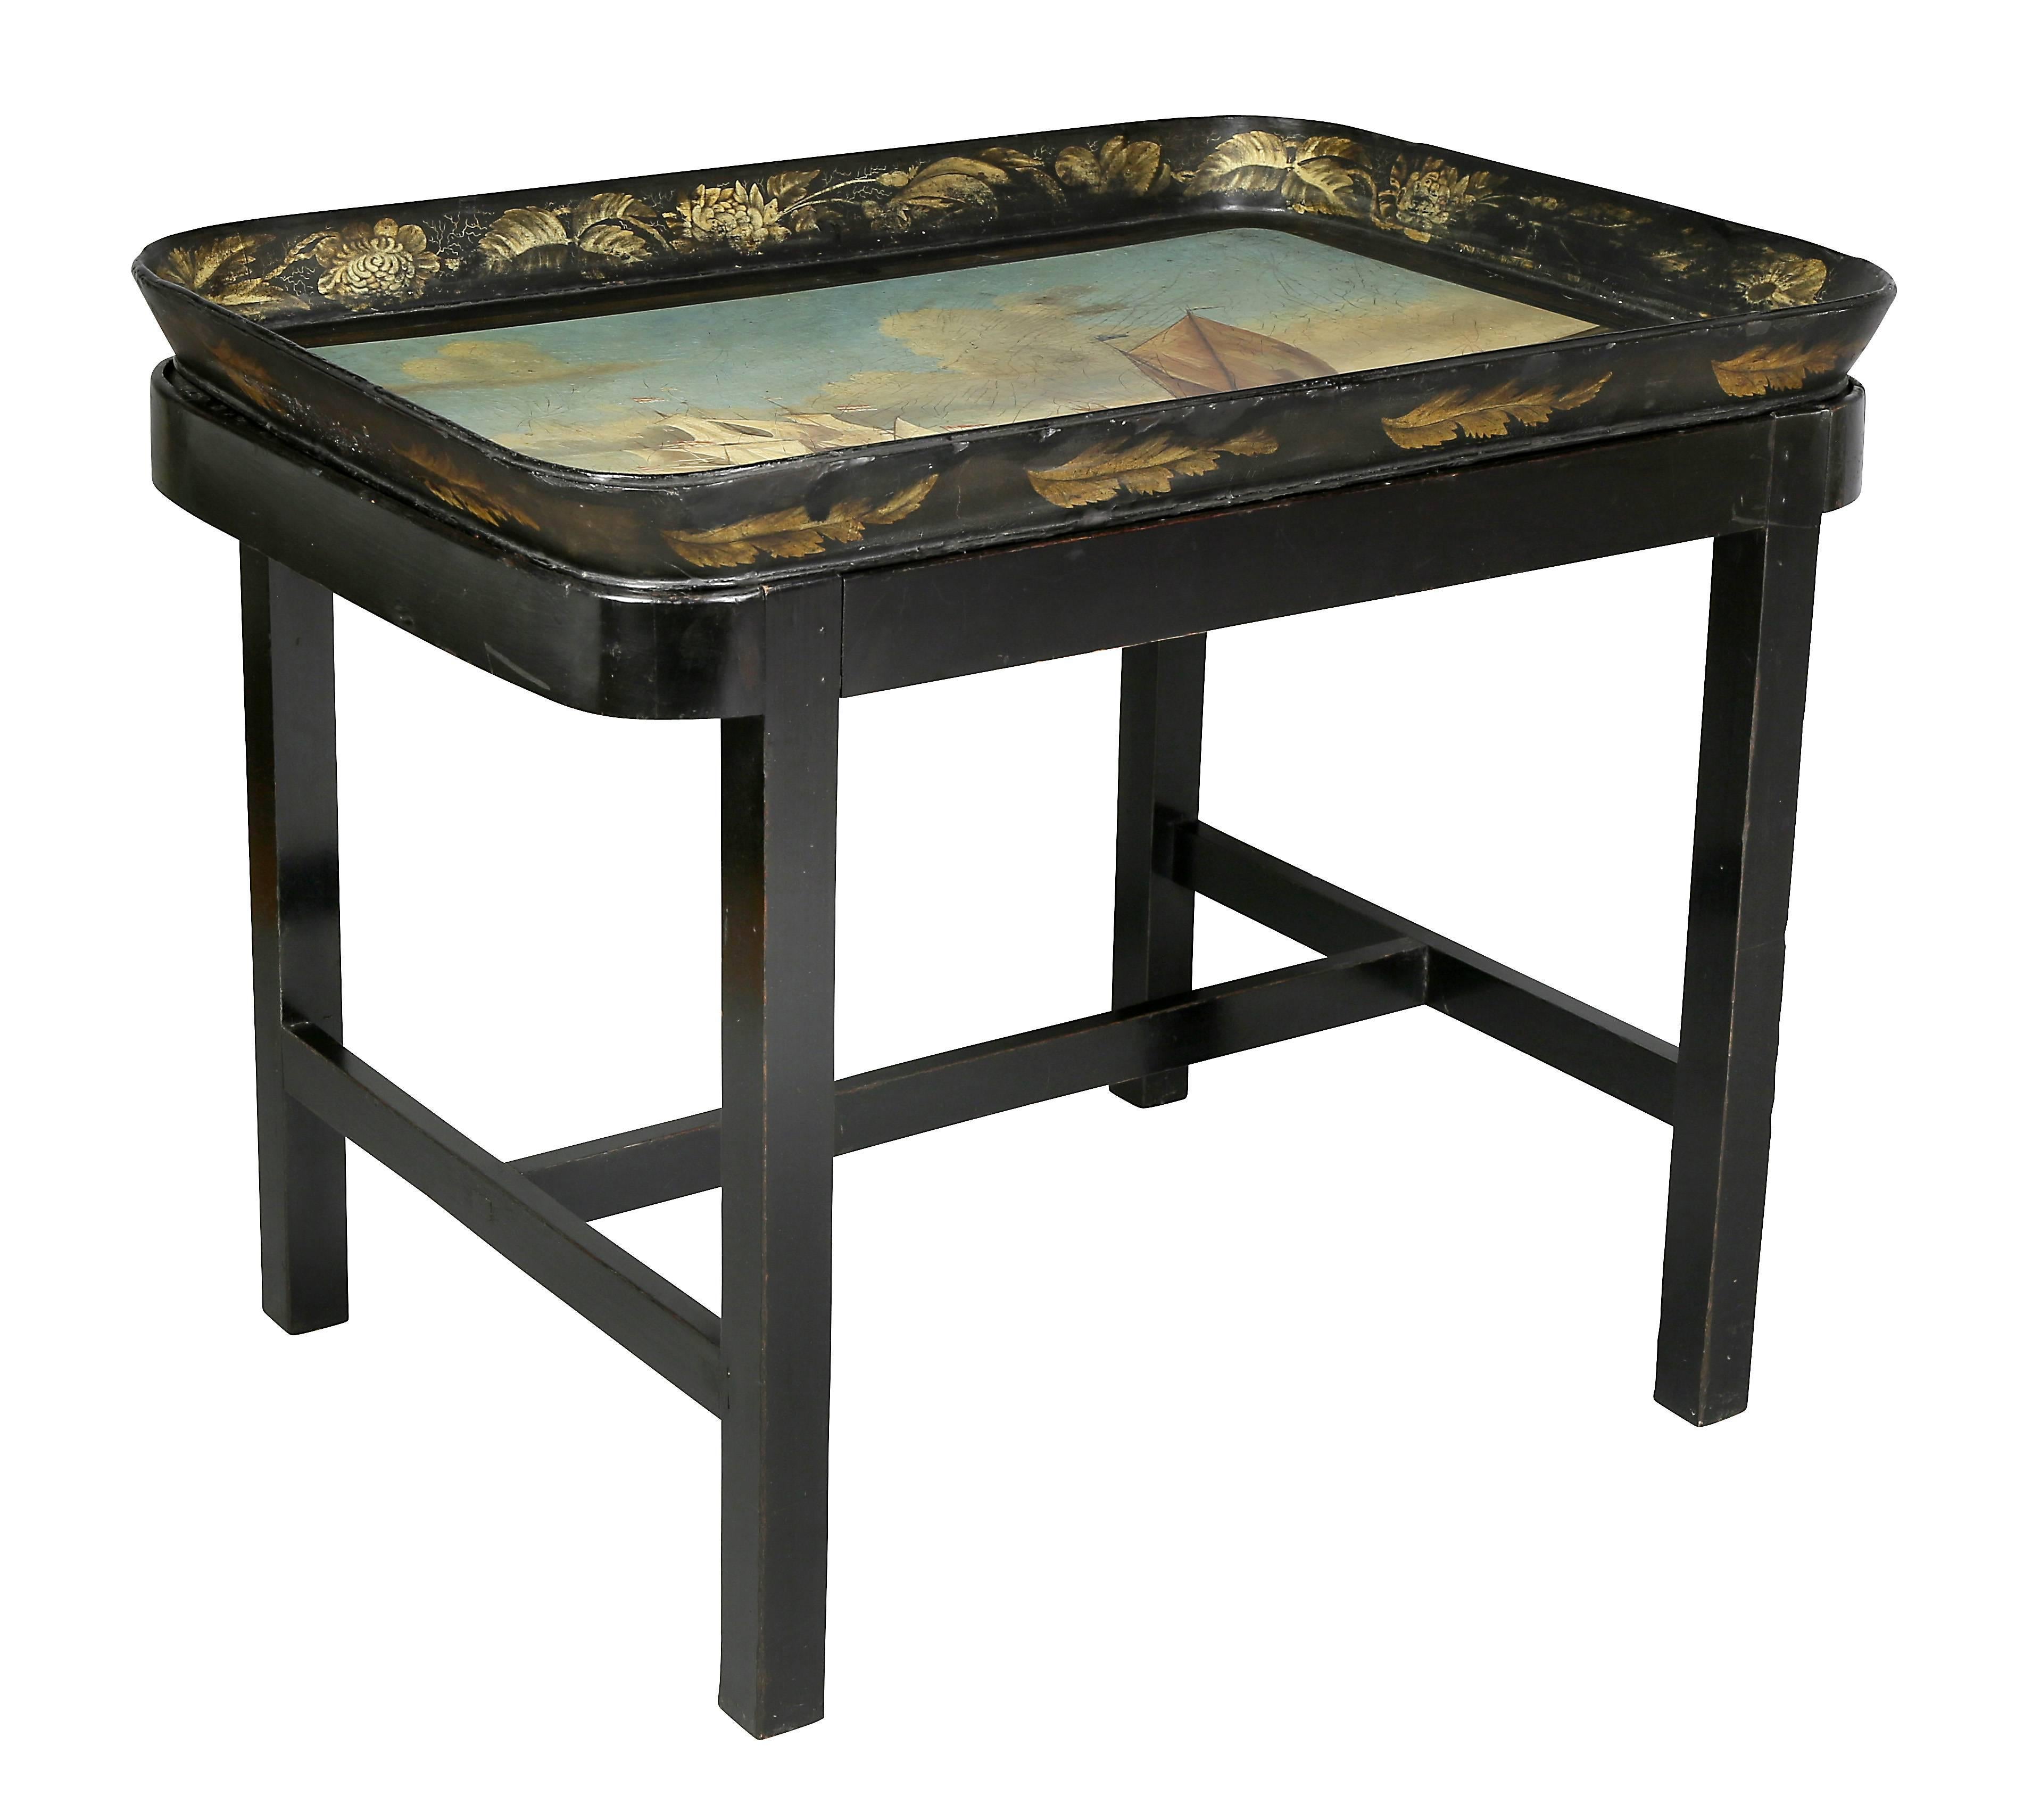 The tray with scene of ships at sea raised on an ebonized base with H form stretcher.